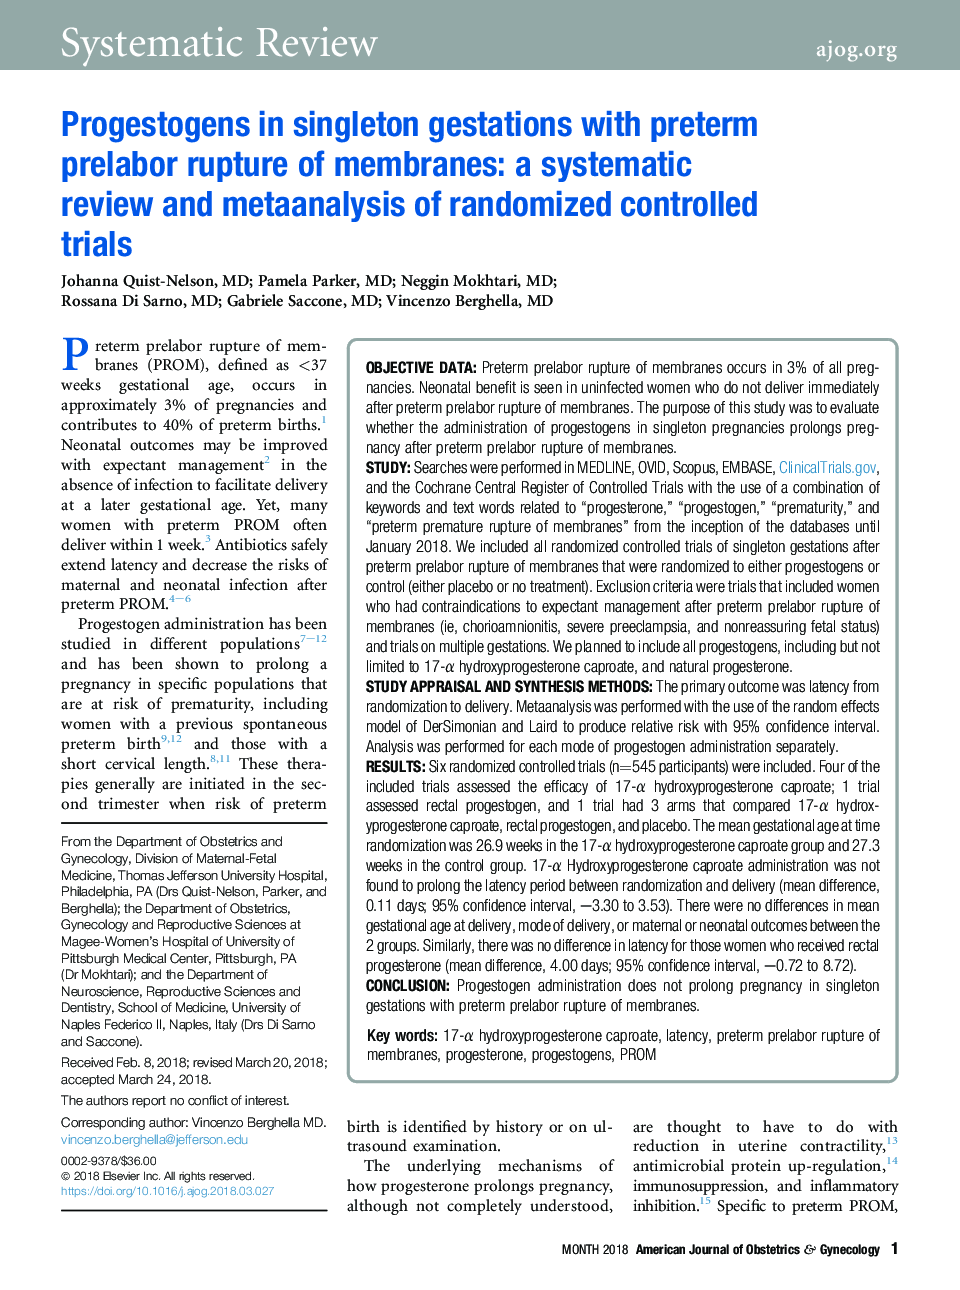 Progestogens in singleton gestations with pretermÂ prelabor rupture of membranes: aÂ systematic review and metaanalysis of randomized controlled trials